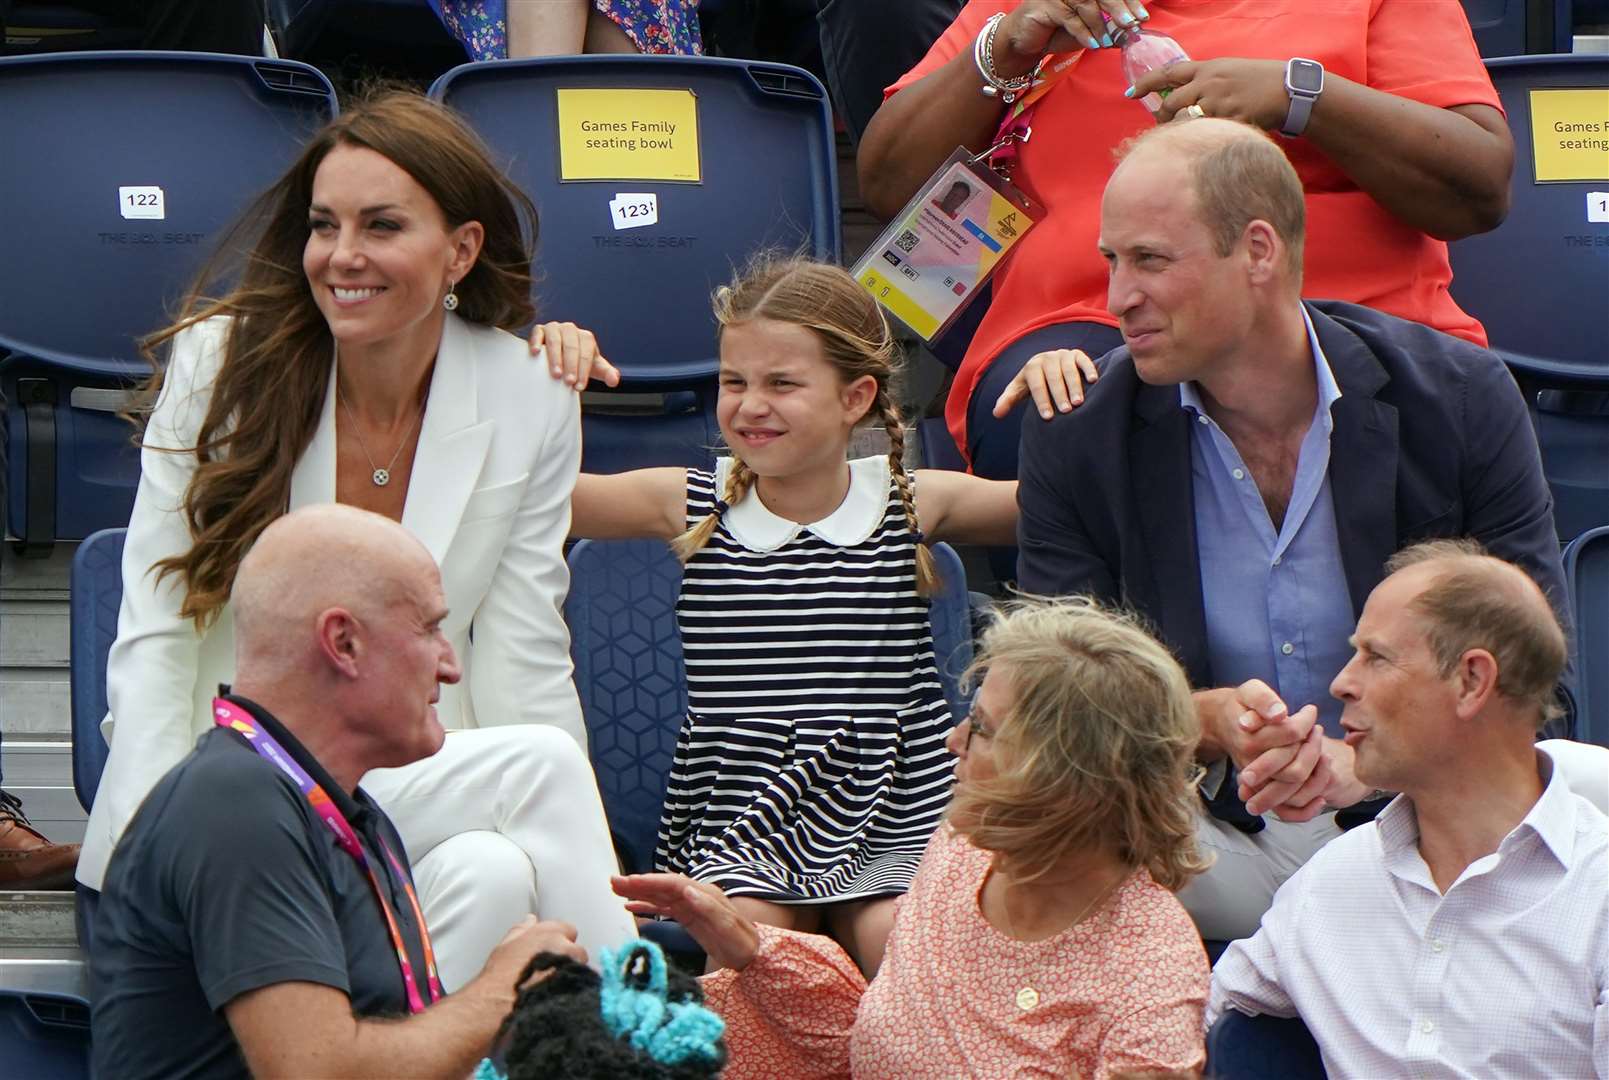 Kate and William with Princess Charlotte seated behind the Earl and Countess of Wessex at the University of Birmingham Hockey and Squash Centre on day five of the 2022 Commonwealth Games in Birmingham (Joe Gidden/PA)